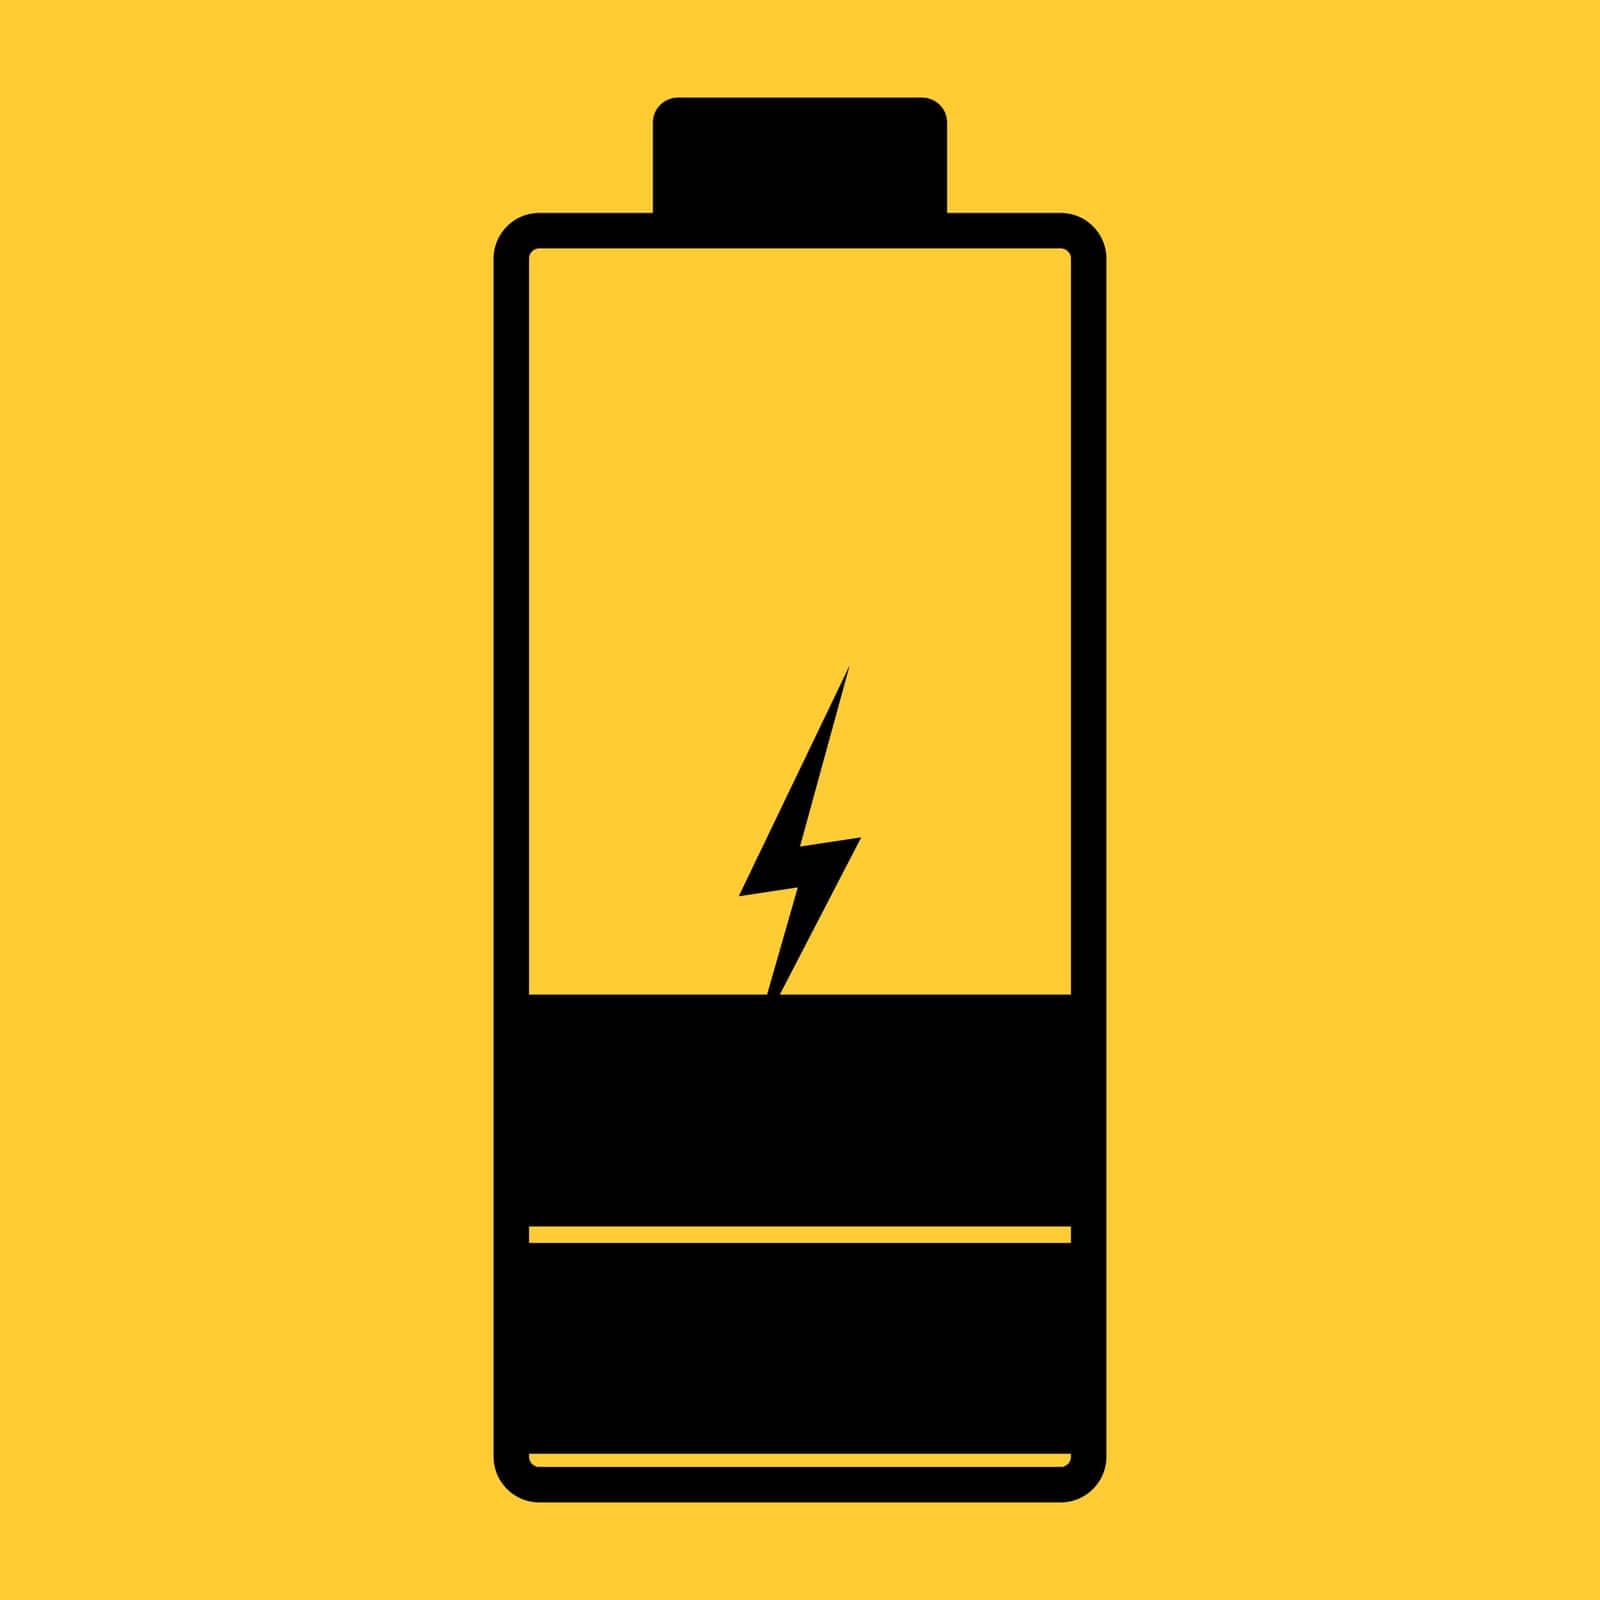 An illustration of a discharging battery. Black and yellow colors. Vector icon